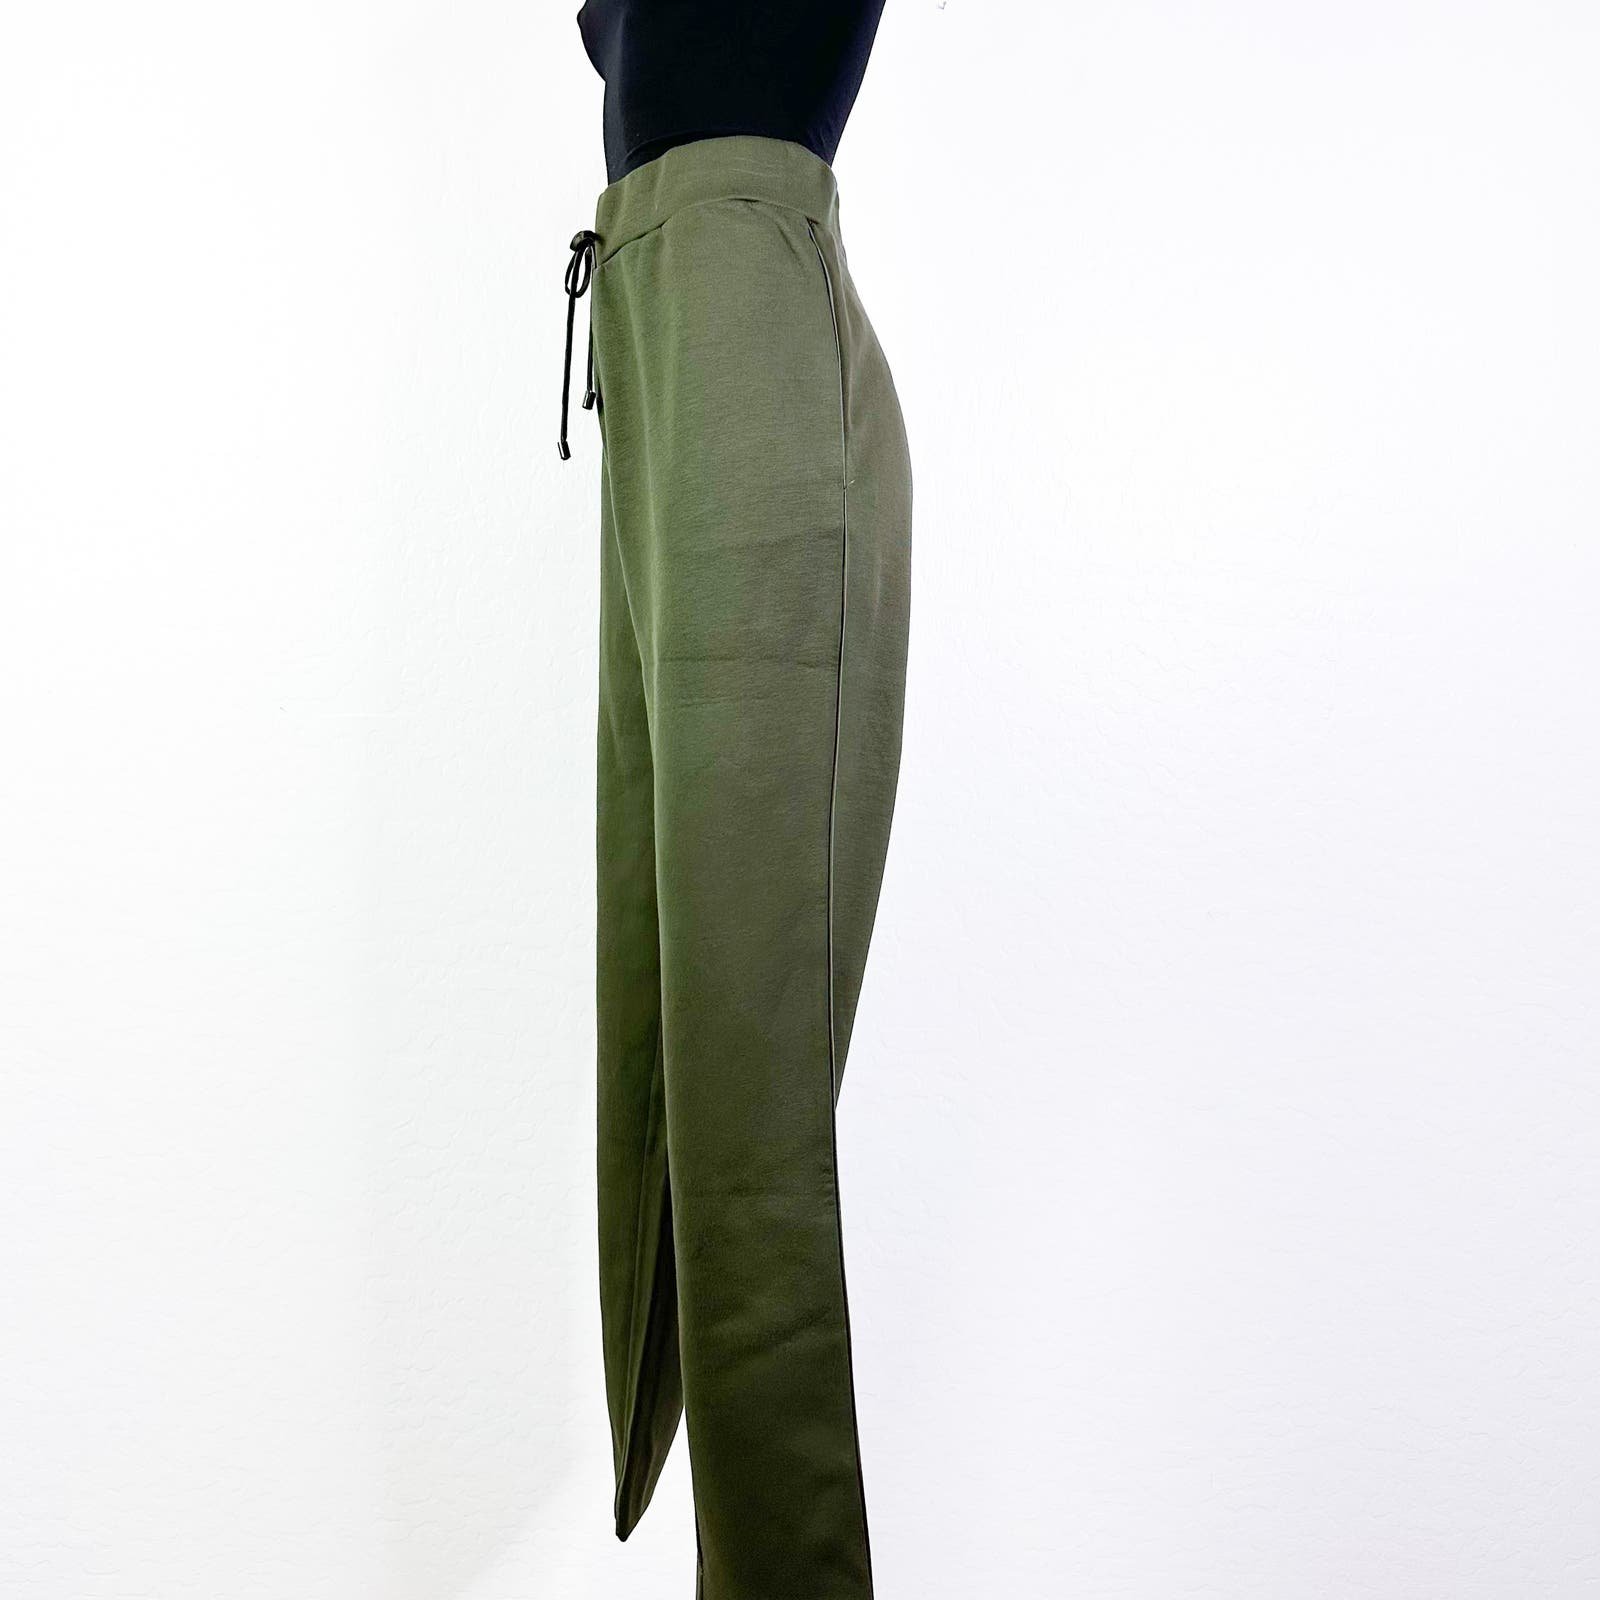 Simple Ted Baker Vveria Relaxed Side Trim Jersey Knit Jogger Pant Olive size 2 US 6 NWT HGqpqCLDE Fashion